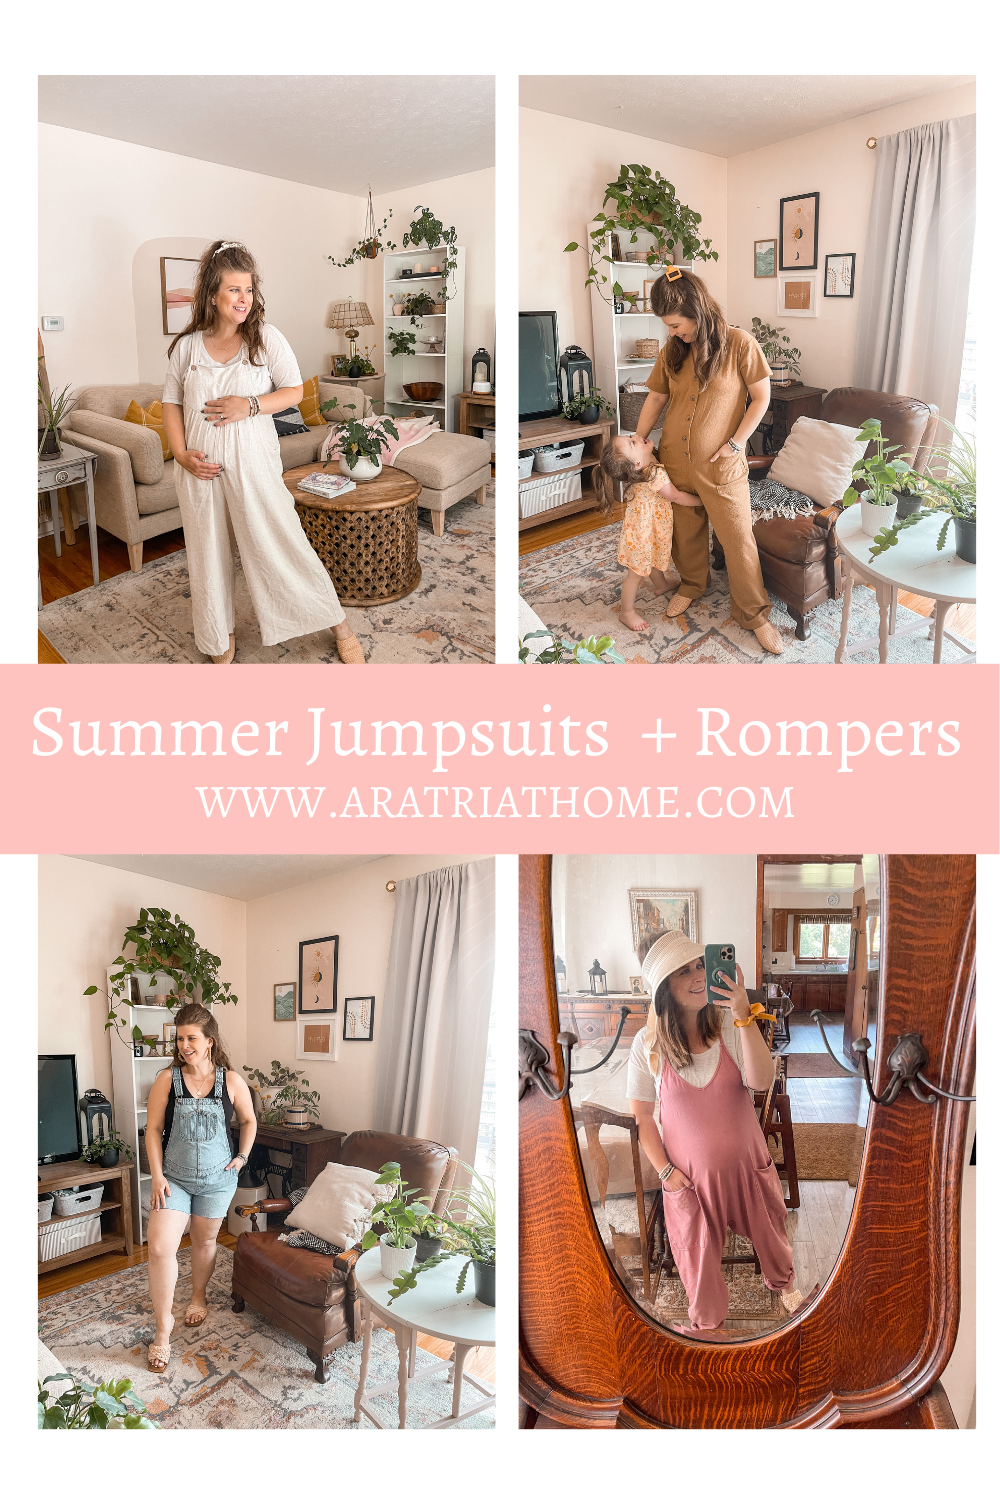 One-piece outfits, like jumpsuits & rompers, make for easy summer